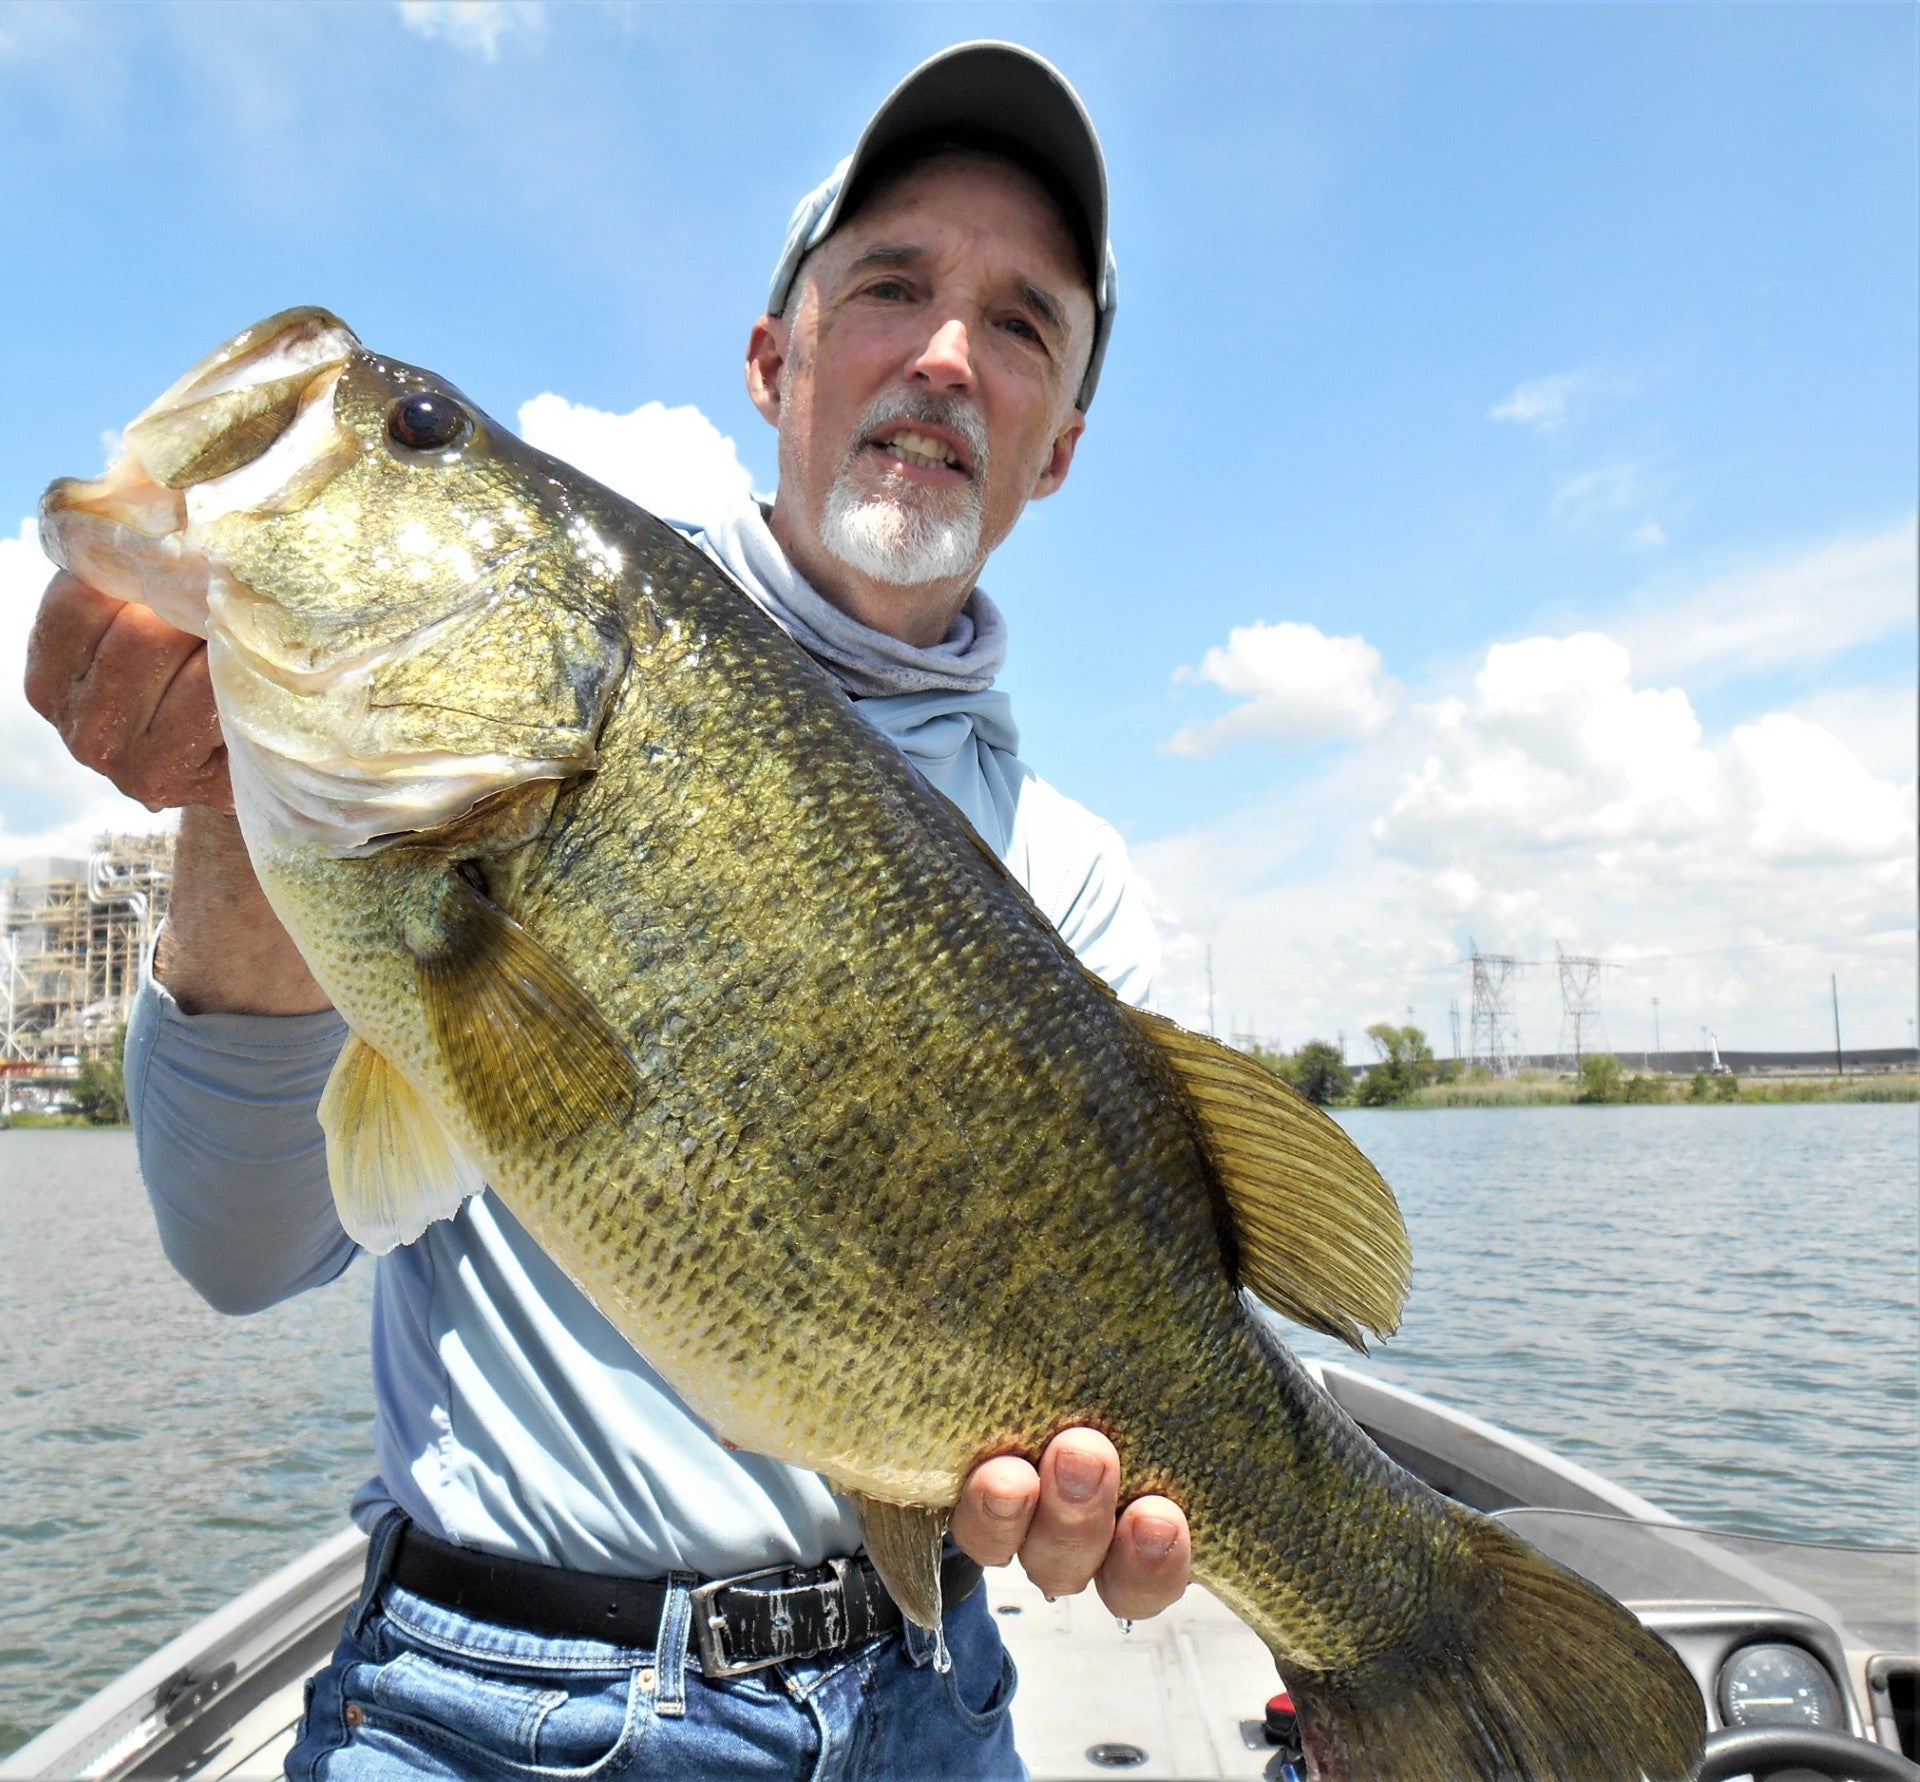 Bob Gum with a Large Mouth bass